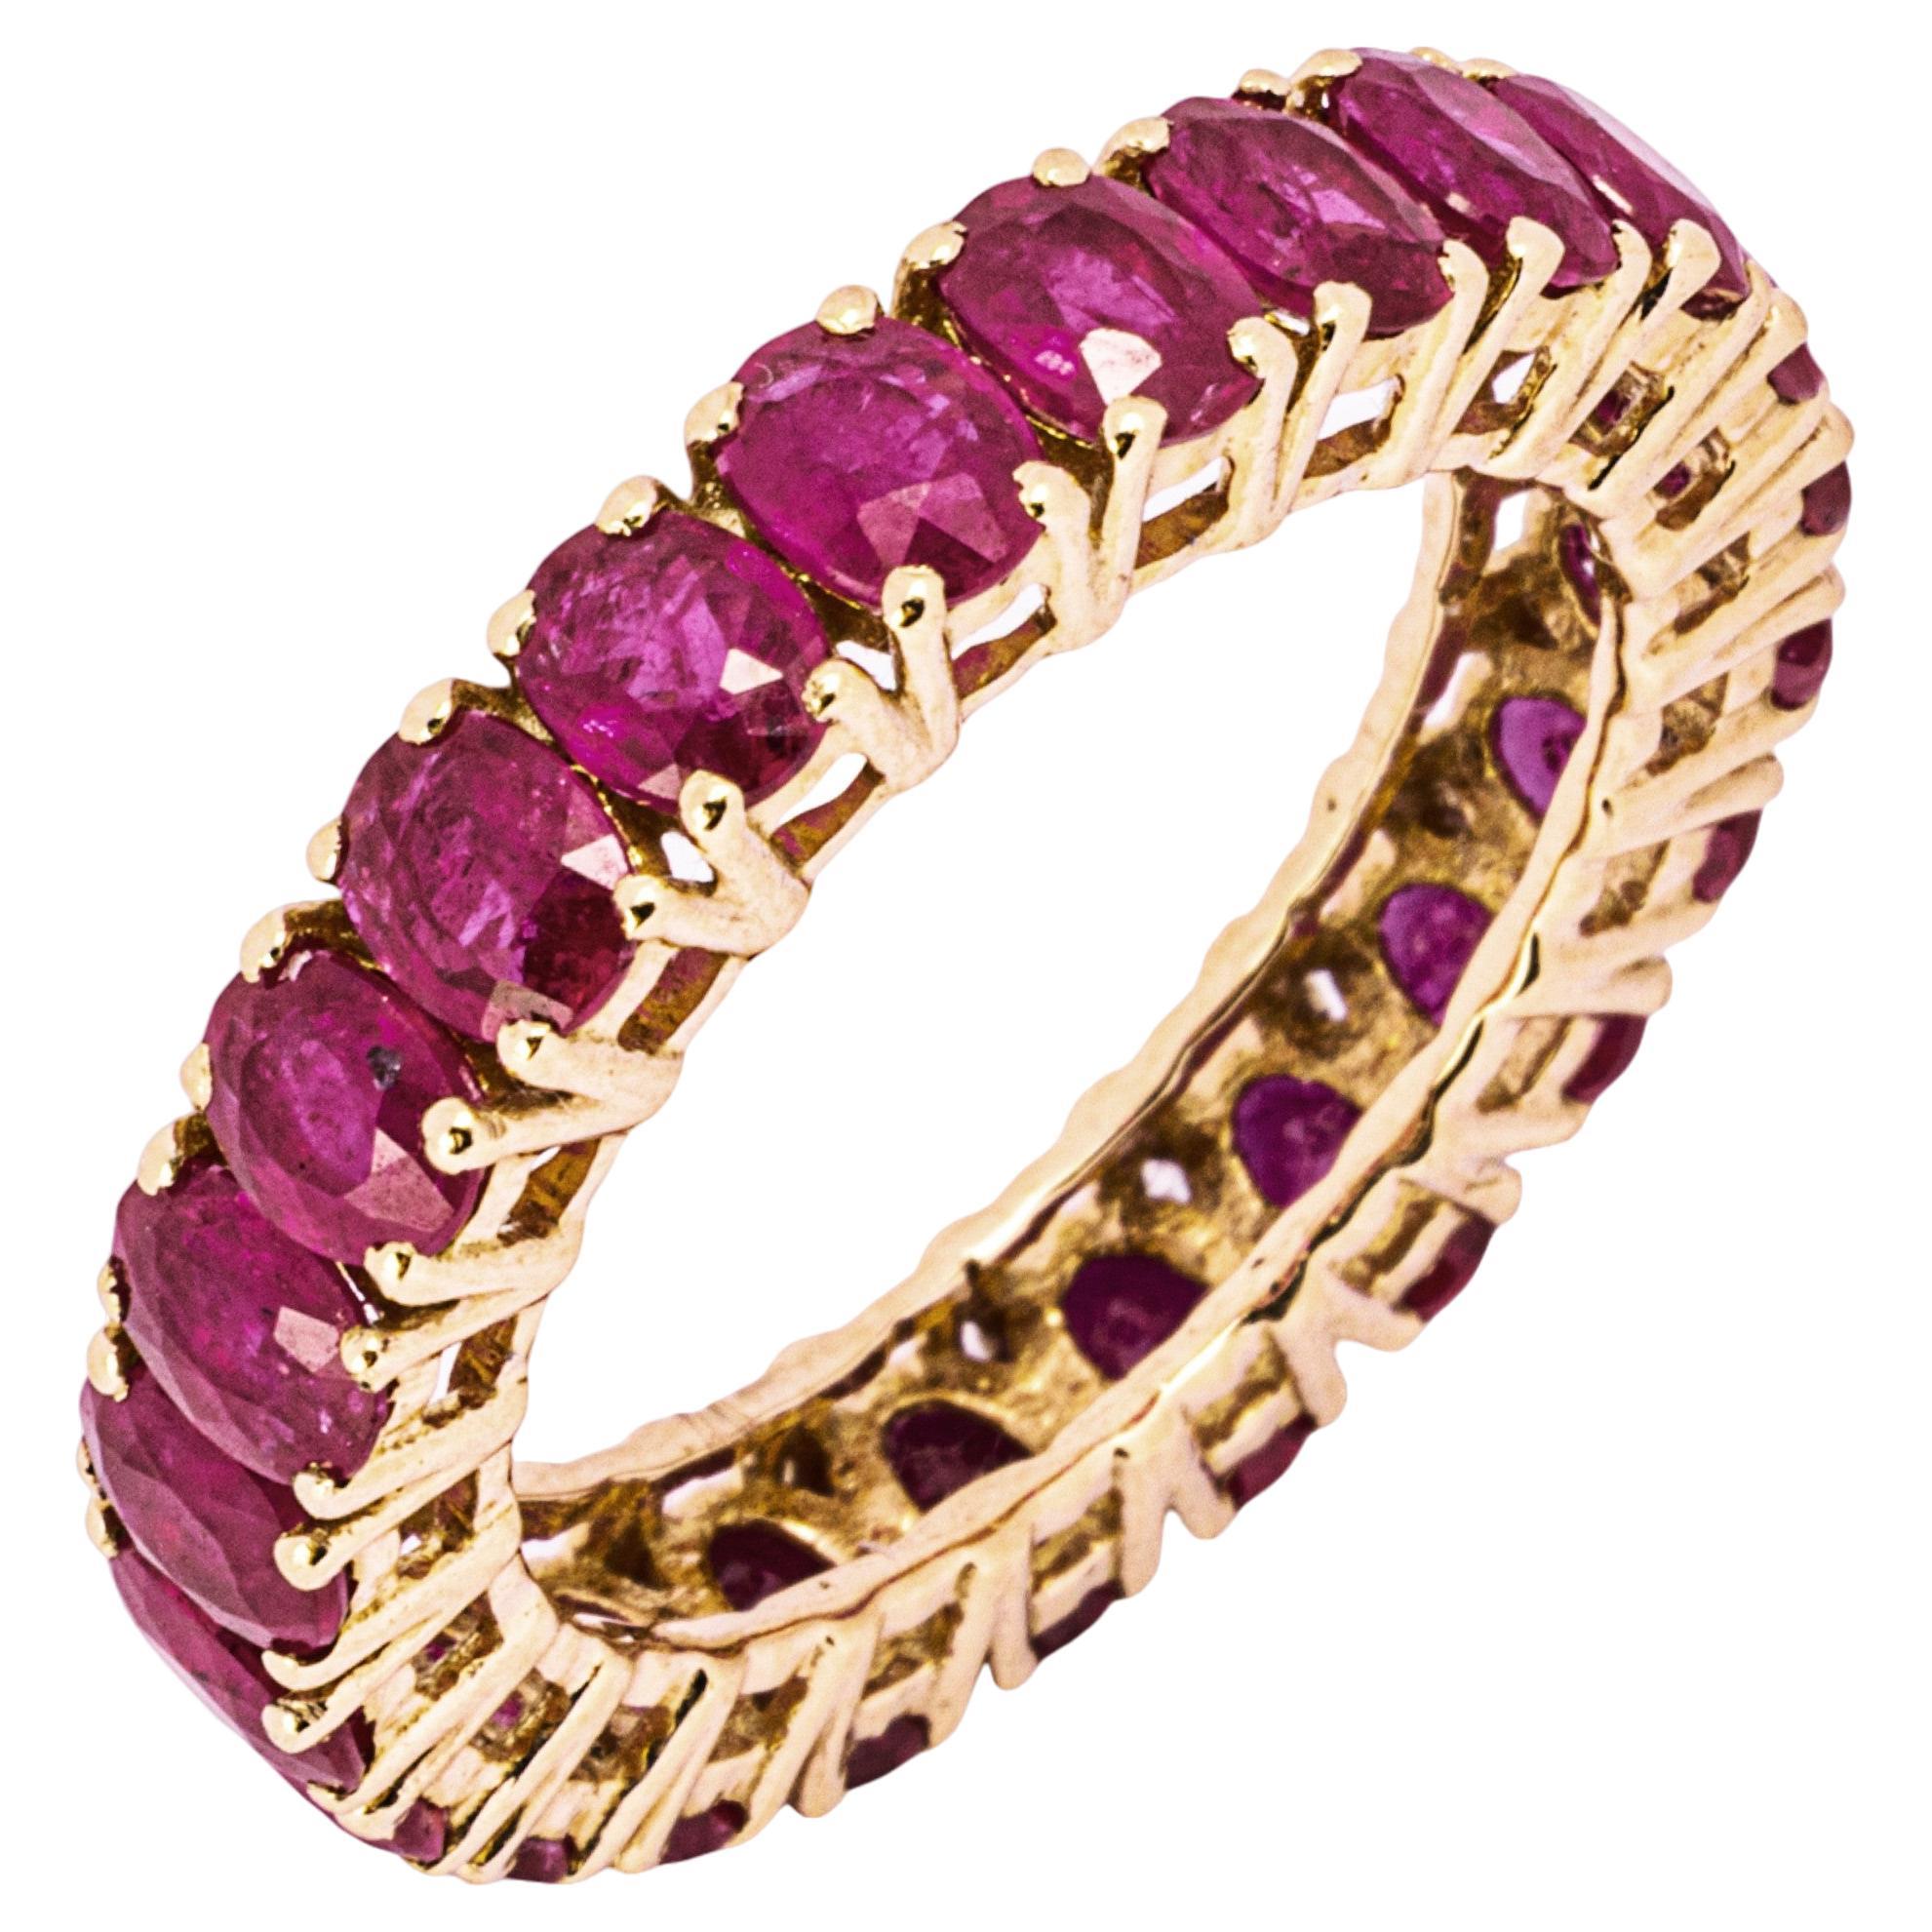 Alex Jona design collection, hand crafted in Italy, 18 karat rose gold eternity band ring, showcasing 23 fine oval cut natural rubies prong-set weighing 4.23 total carats. 
Alex Jona jewels stand out, not only for their special design and for the